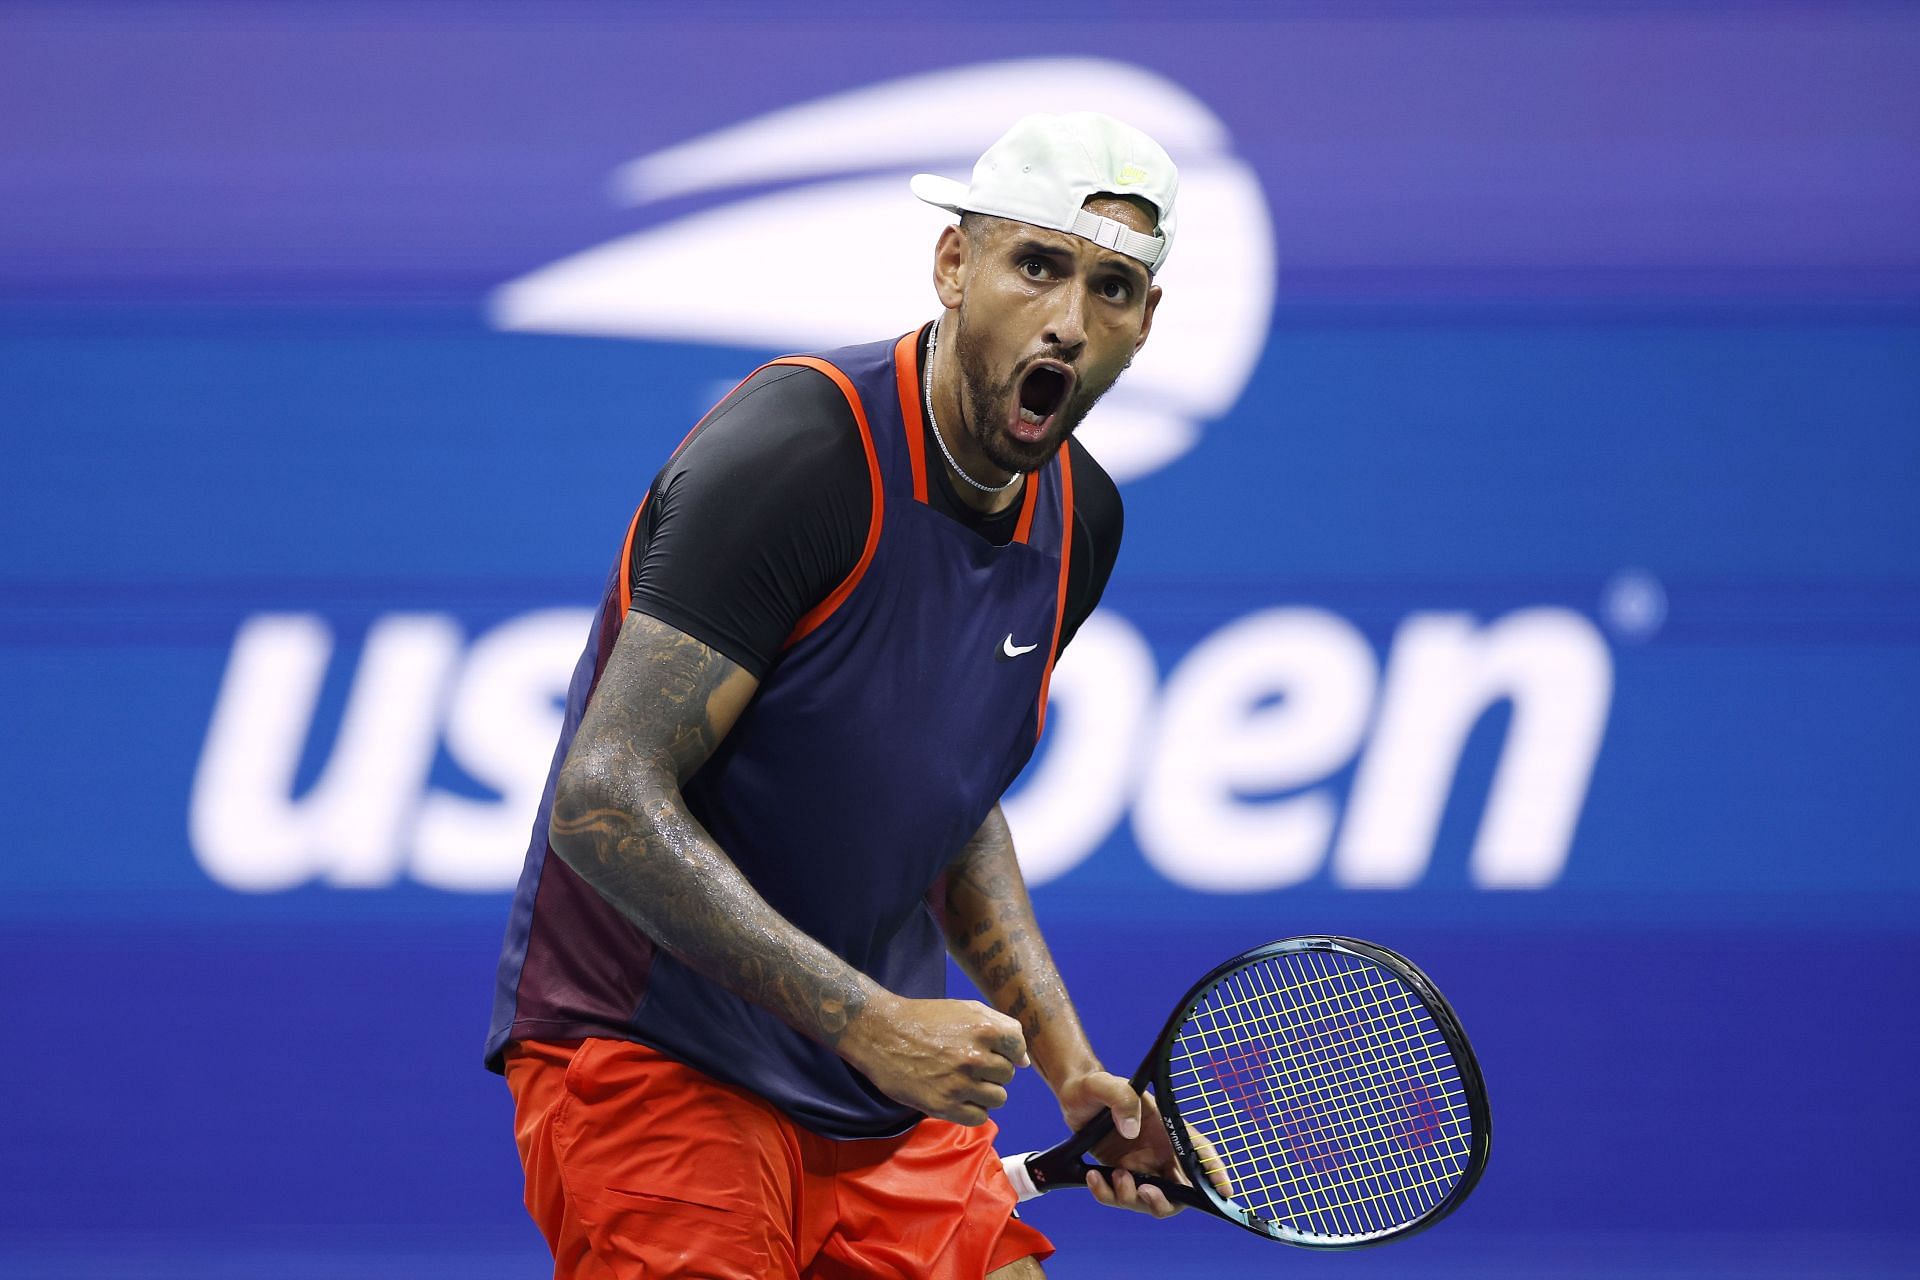 Nick Kyrgios is three victories away from a maiden Grand Slam title at the US Open